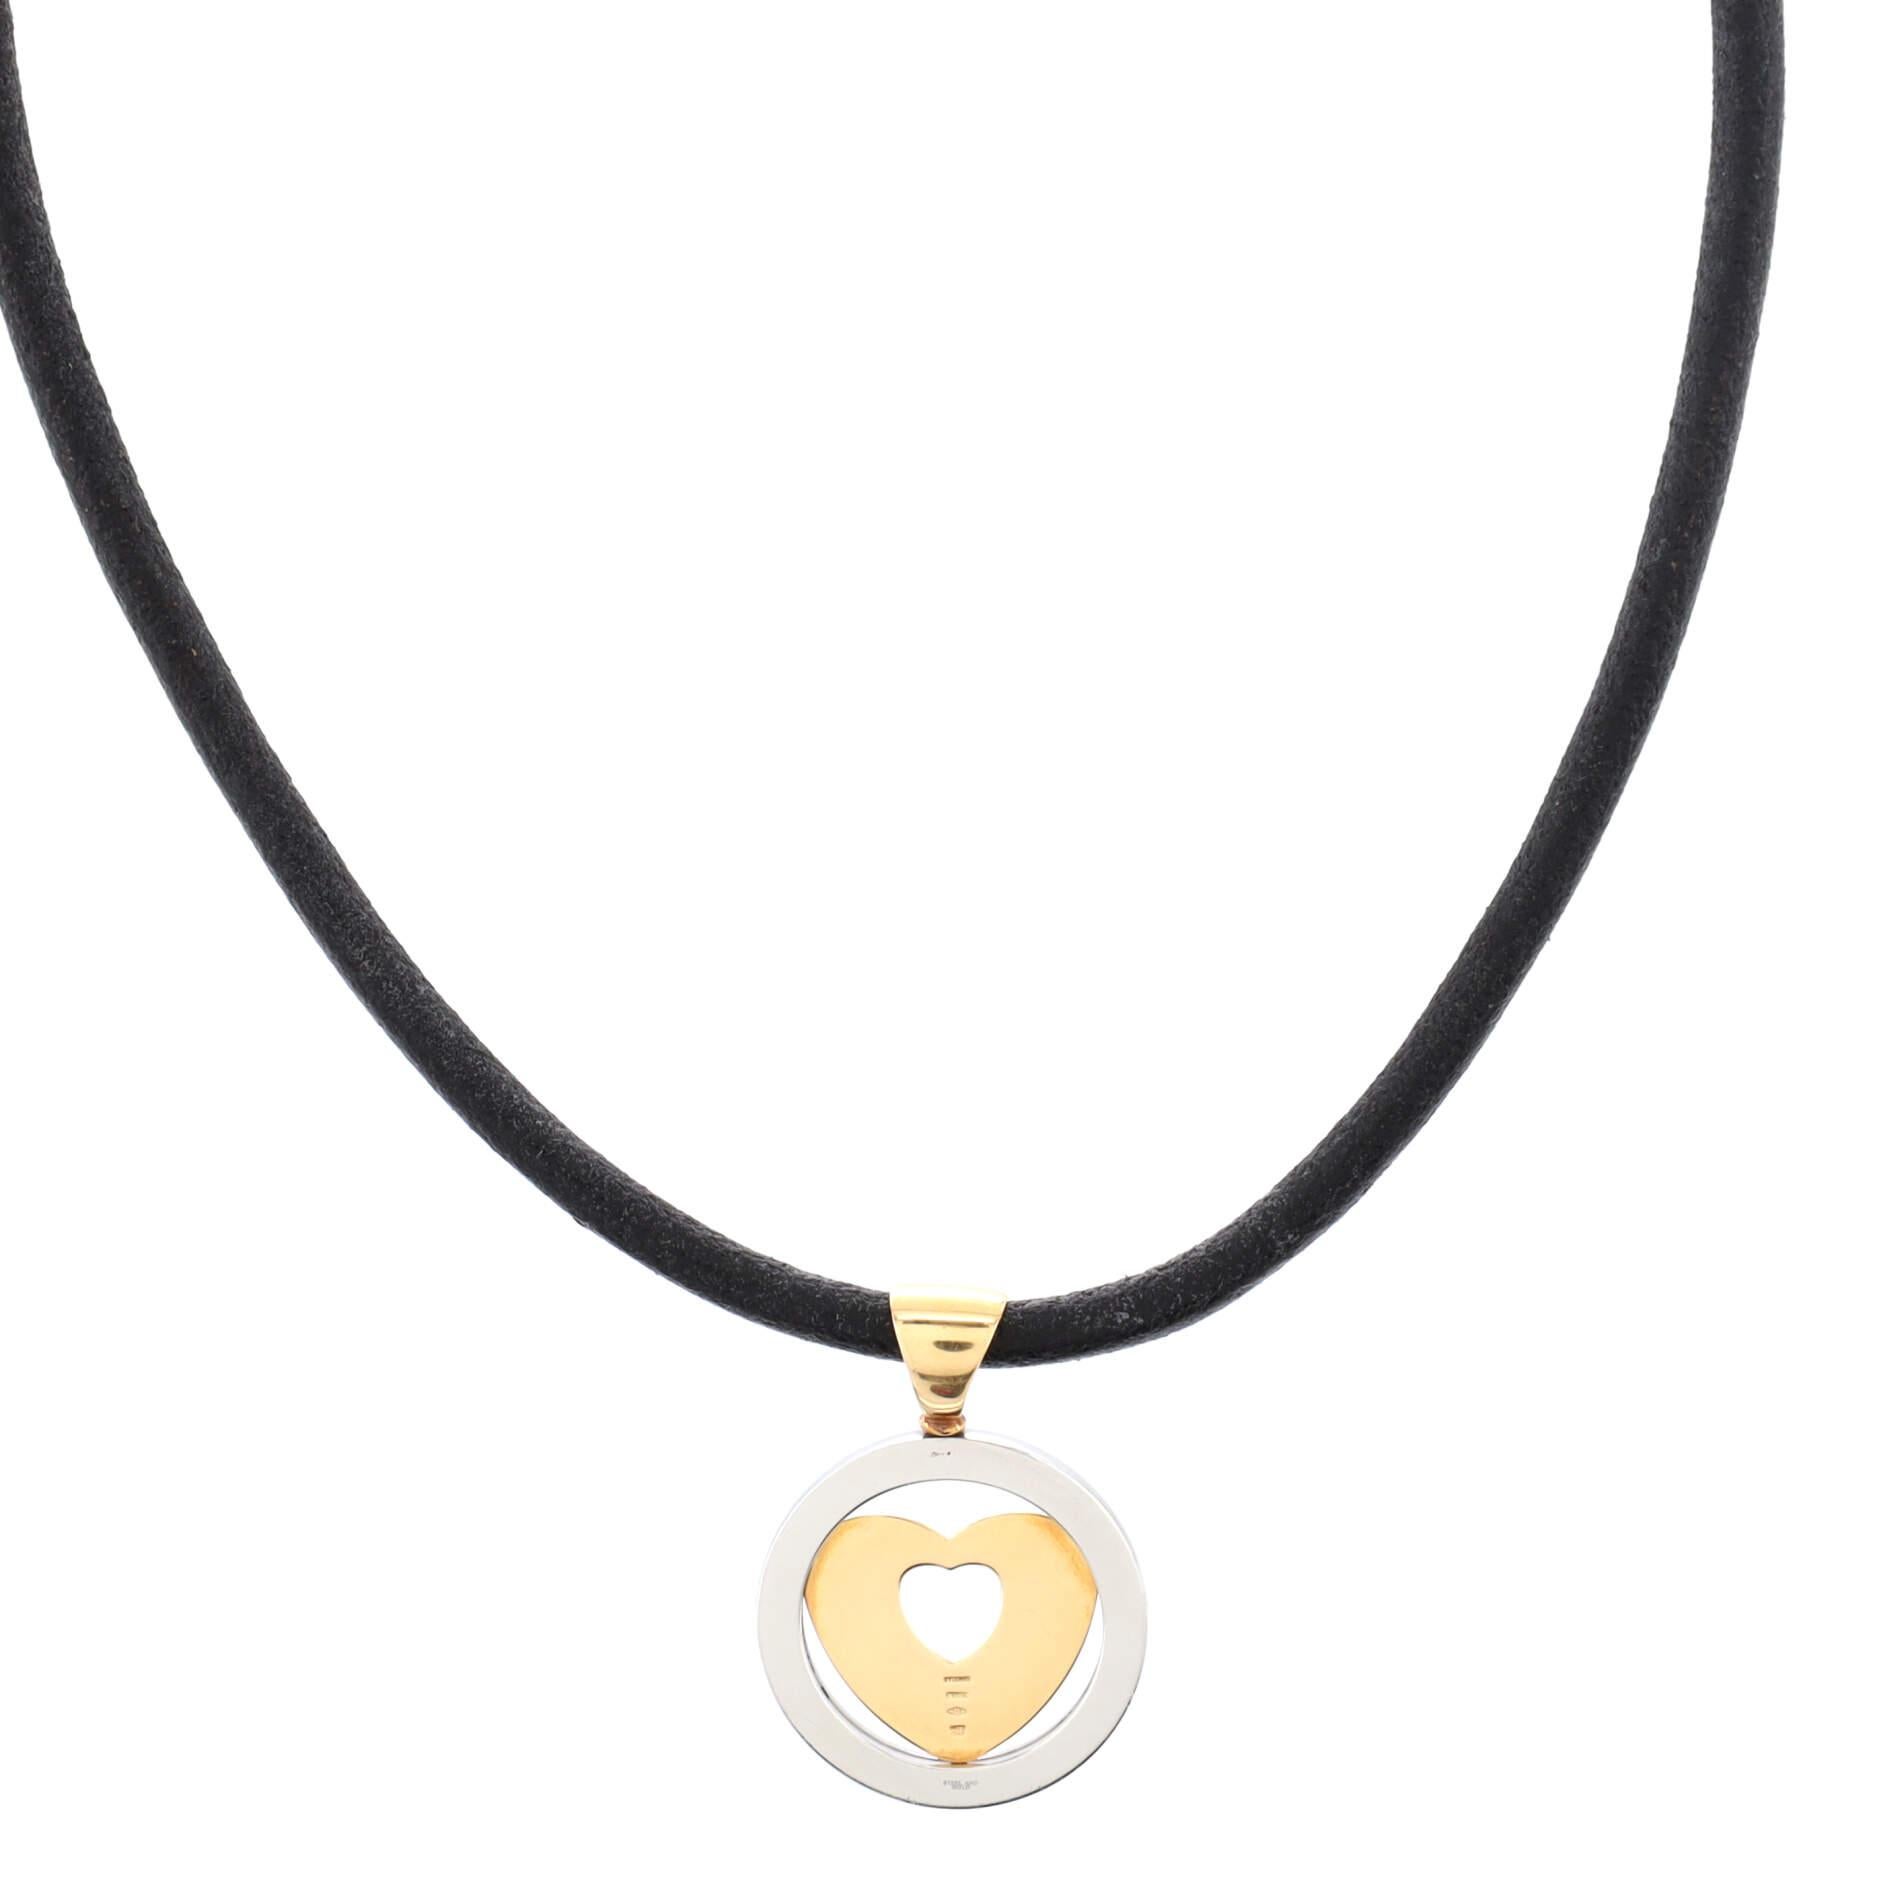 Women's Bvlgari Tondo Heart Pendant Necklace Stainless Steel with 18k Yellow Gold